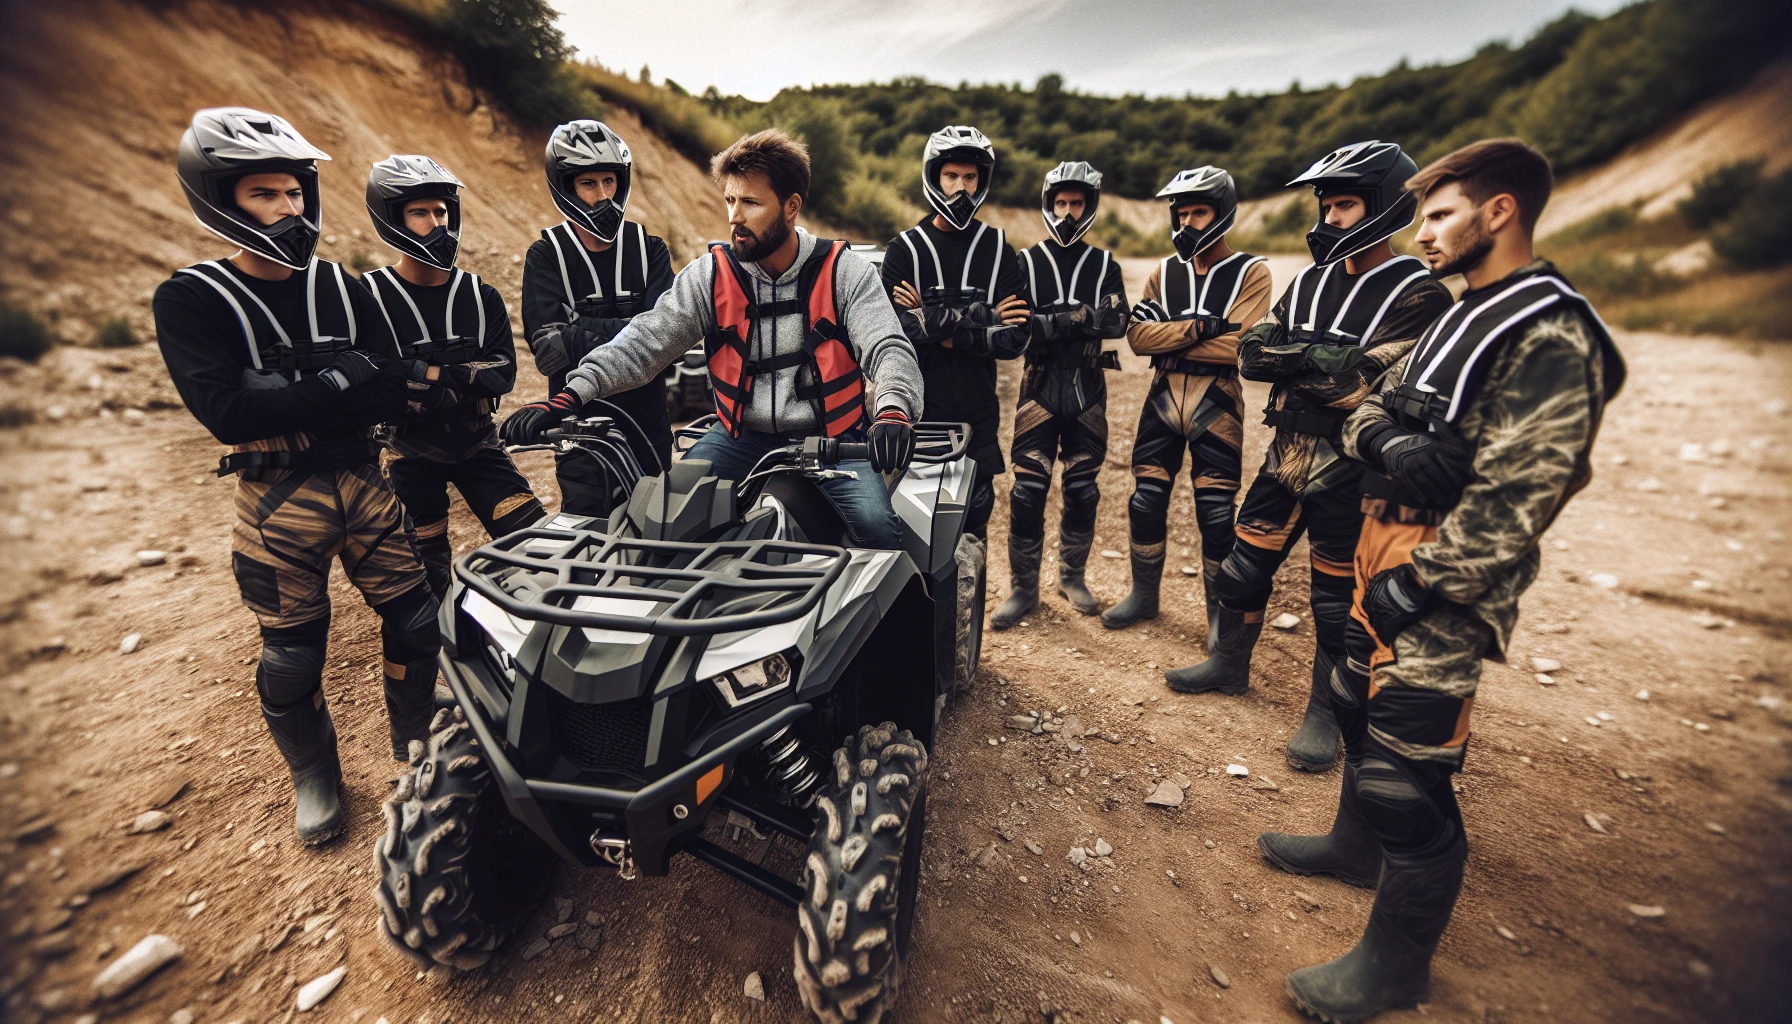 Hands-on safety training for side by side ATV riders